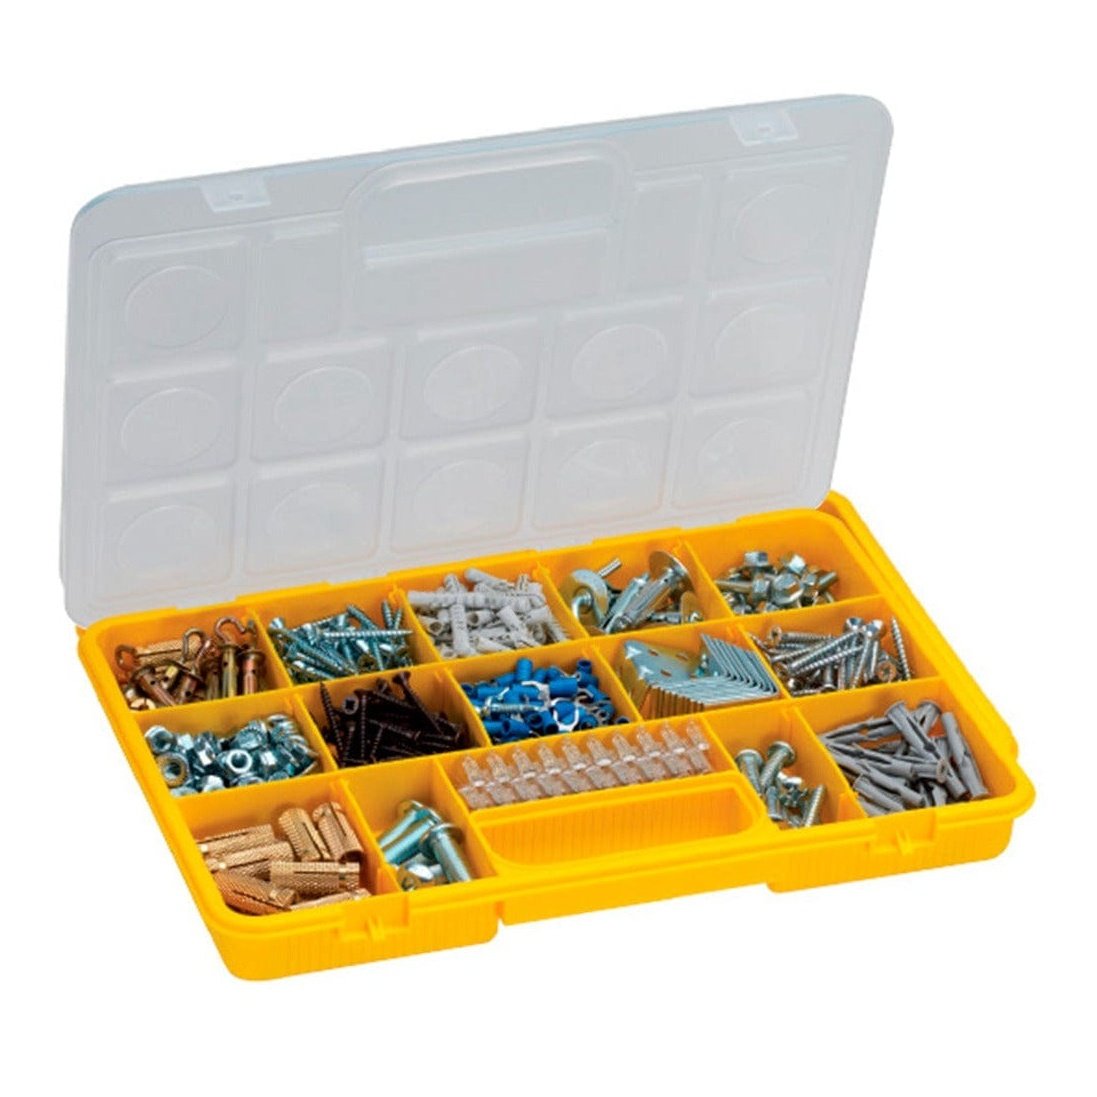 Buy Dimartino Plastic Small Organizer 32x22cm - Cargo 900 | Supply Master Accra, Ghana Tool Boxes Bags & Belts Buy Tools hardware Building materials